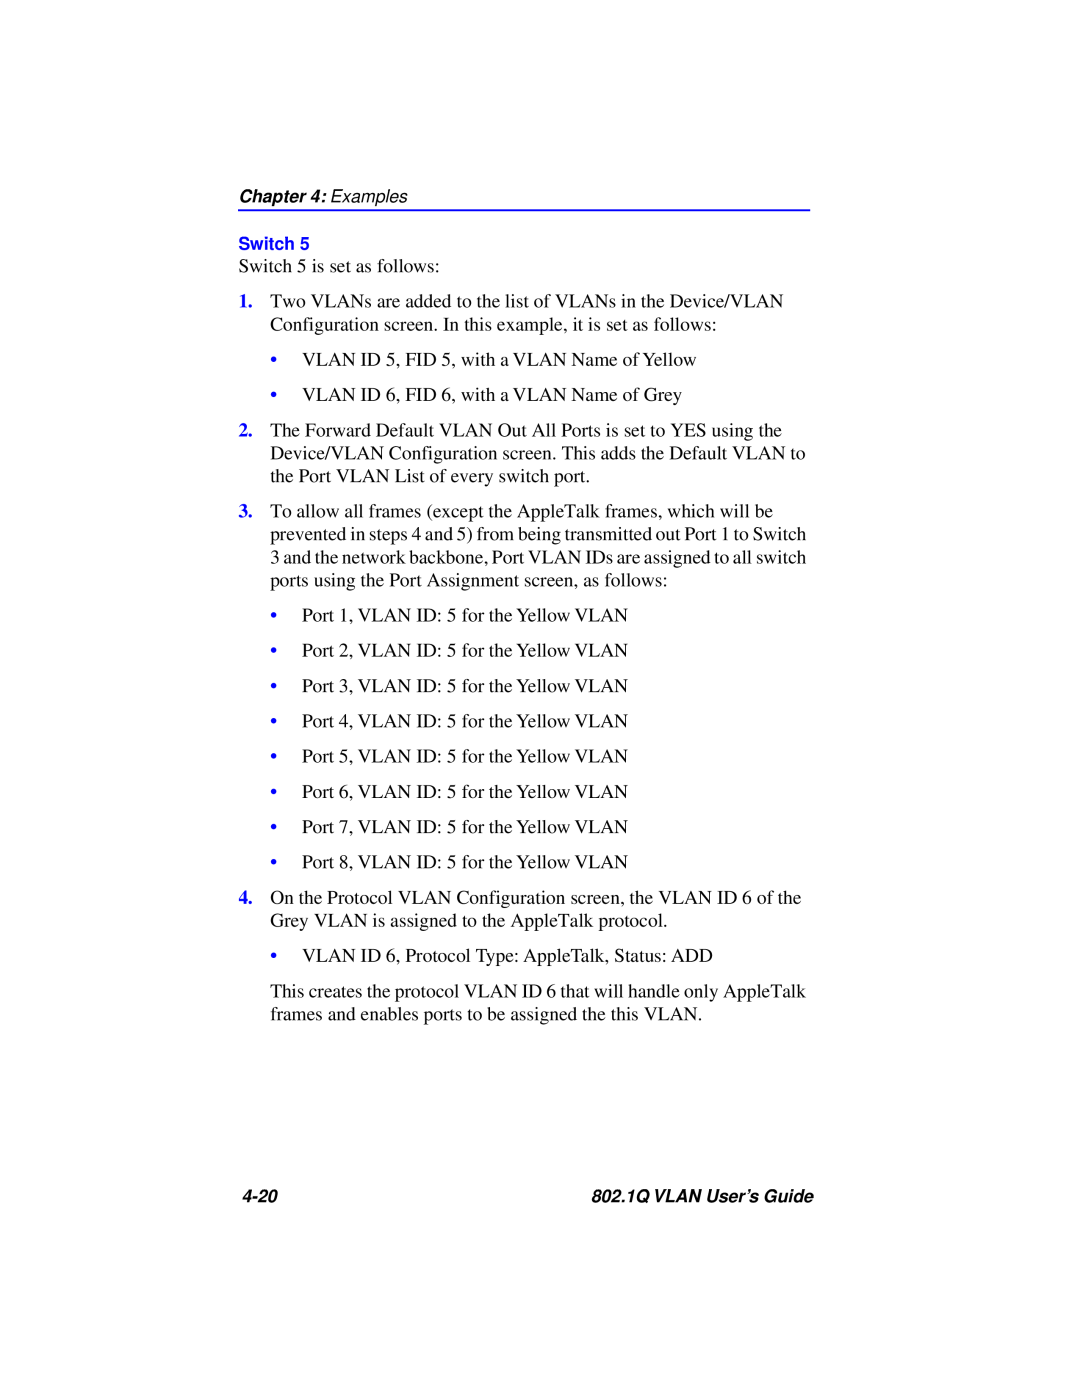 Cabletron Systems 802.1Q manual Switch 5 is set as follows 